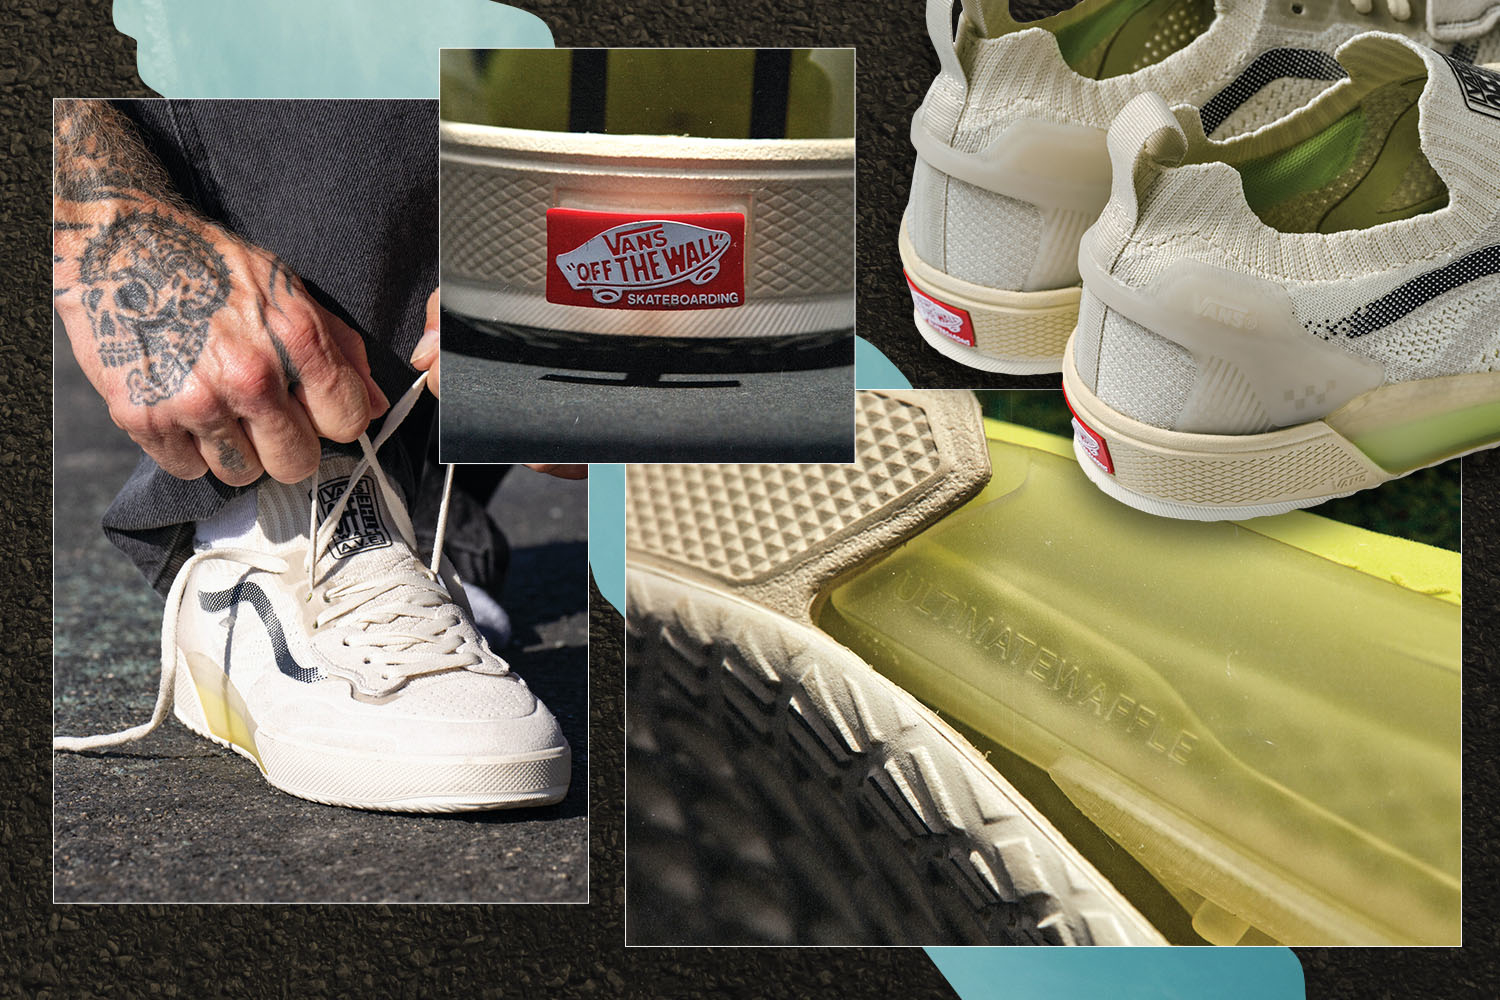 Collage of various sneakers, including a close-up of a Vans shoe with a skater&#x27;s tattoo visible